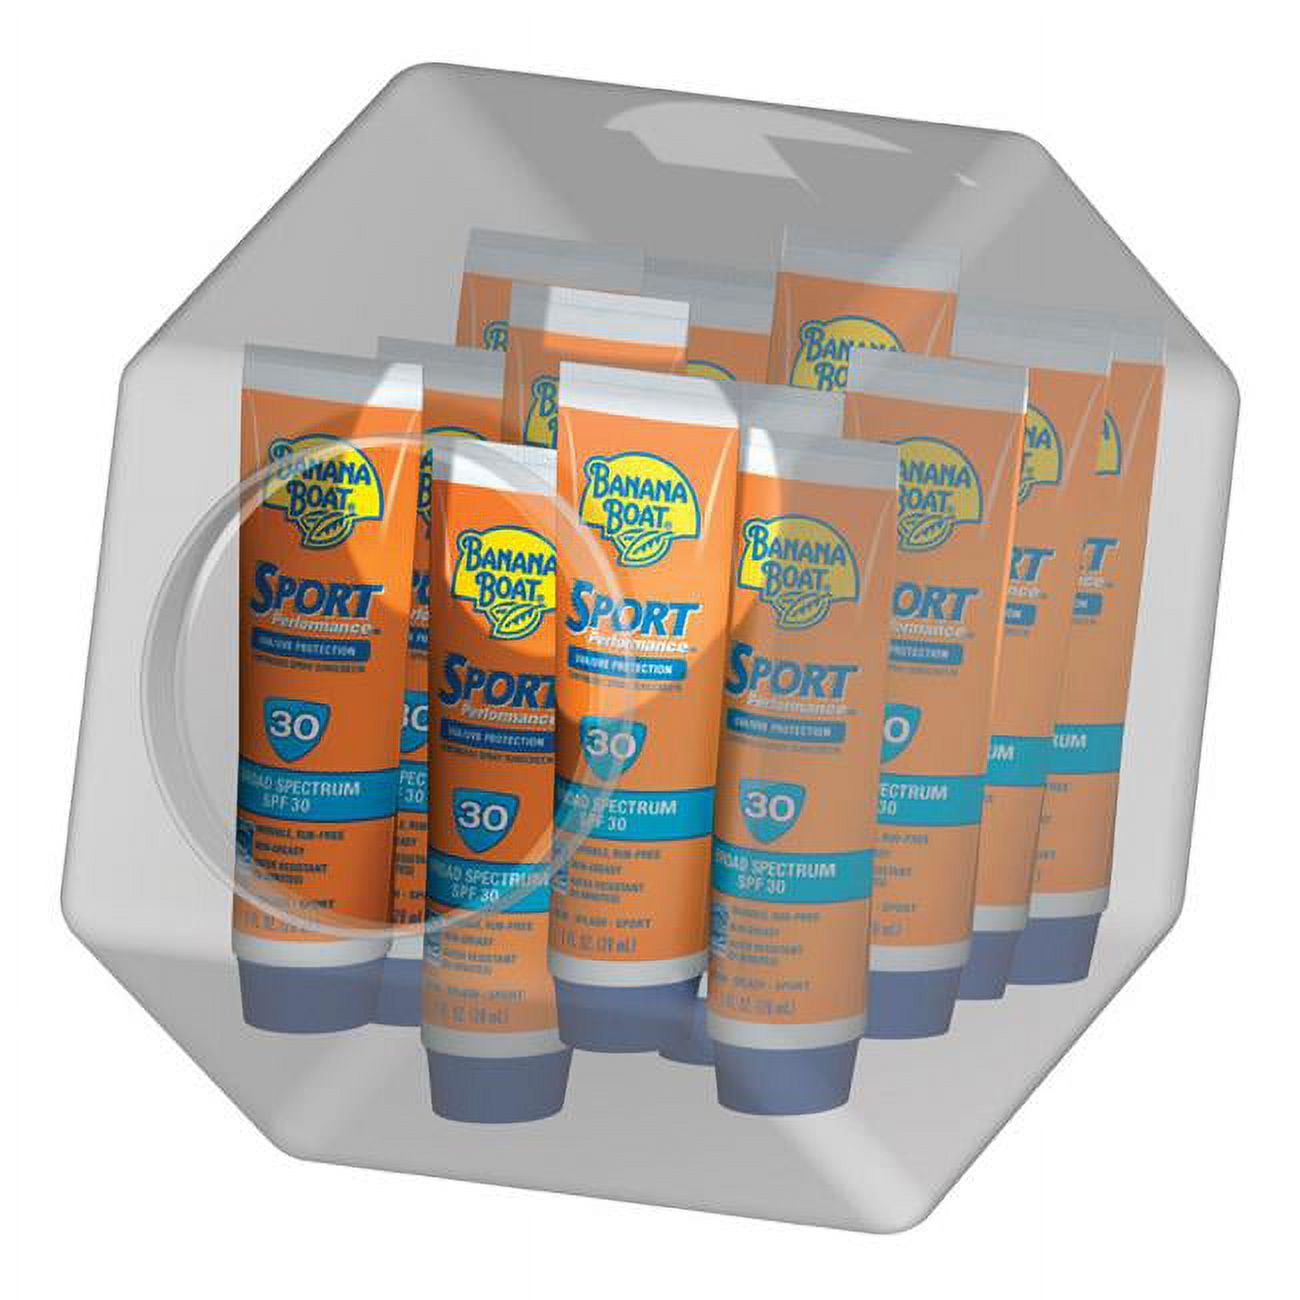 9285438 Fishbowl Sunscreen Display For X301093300 - 24 Pack Per Case - Pack Of 24